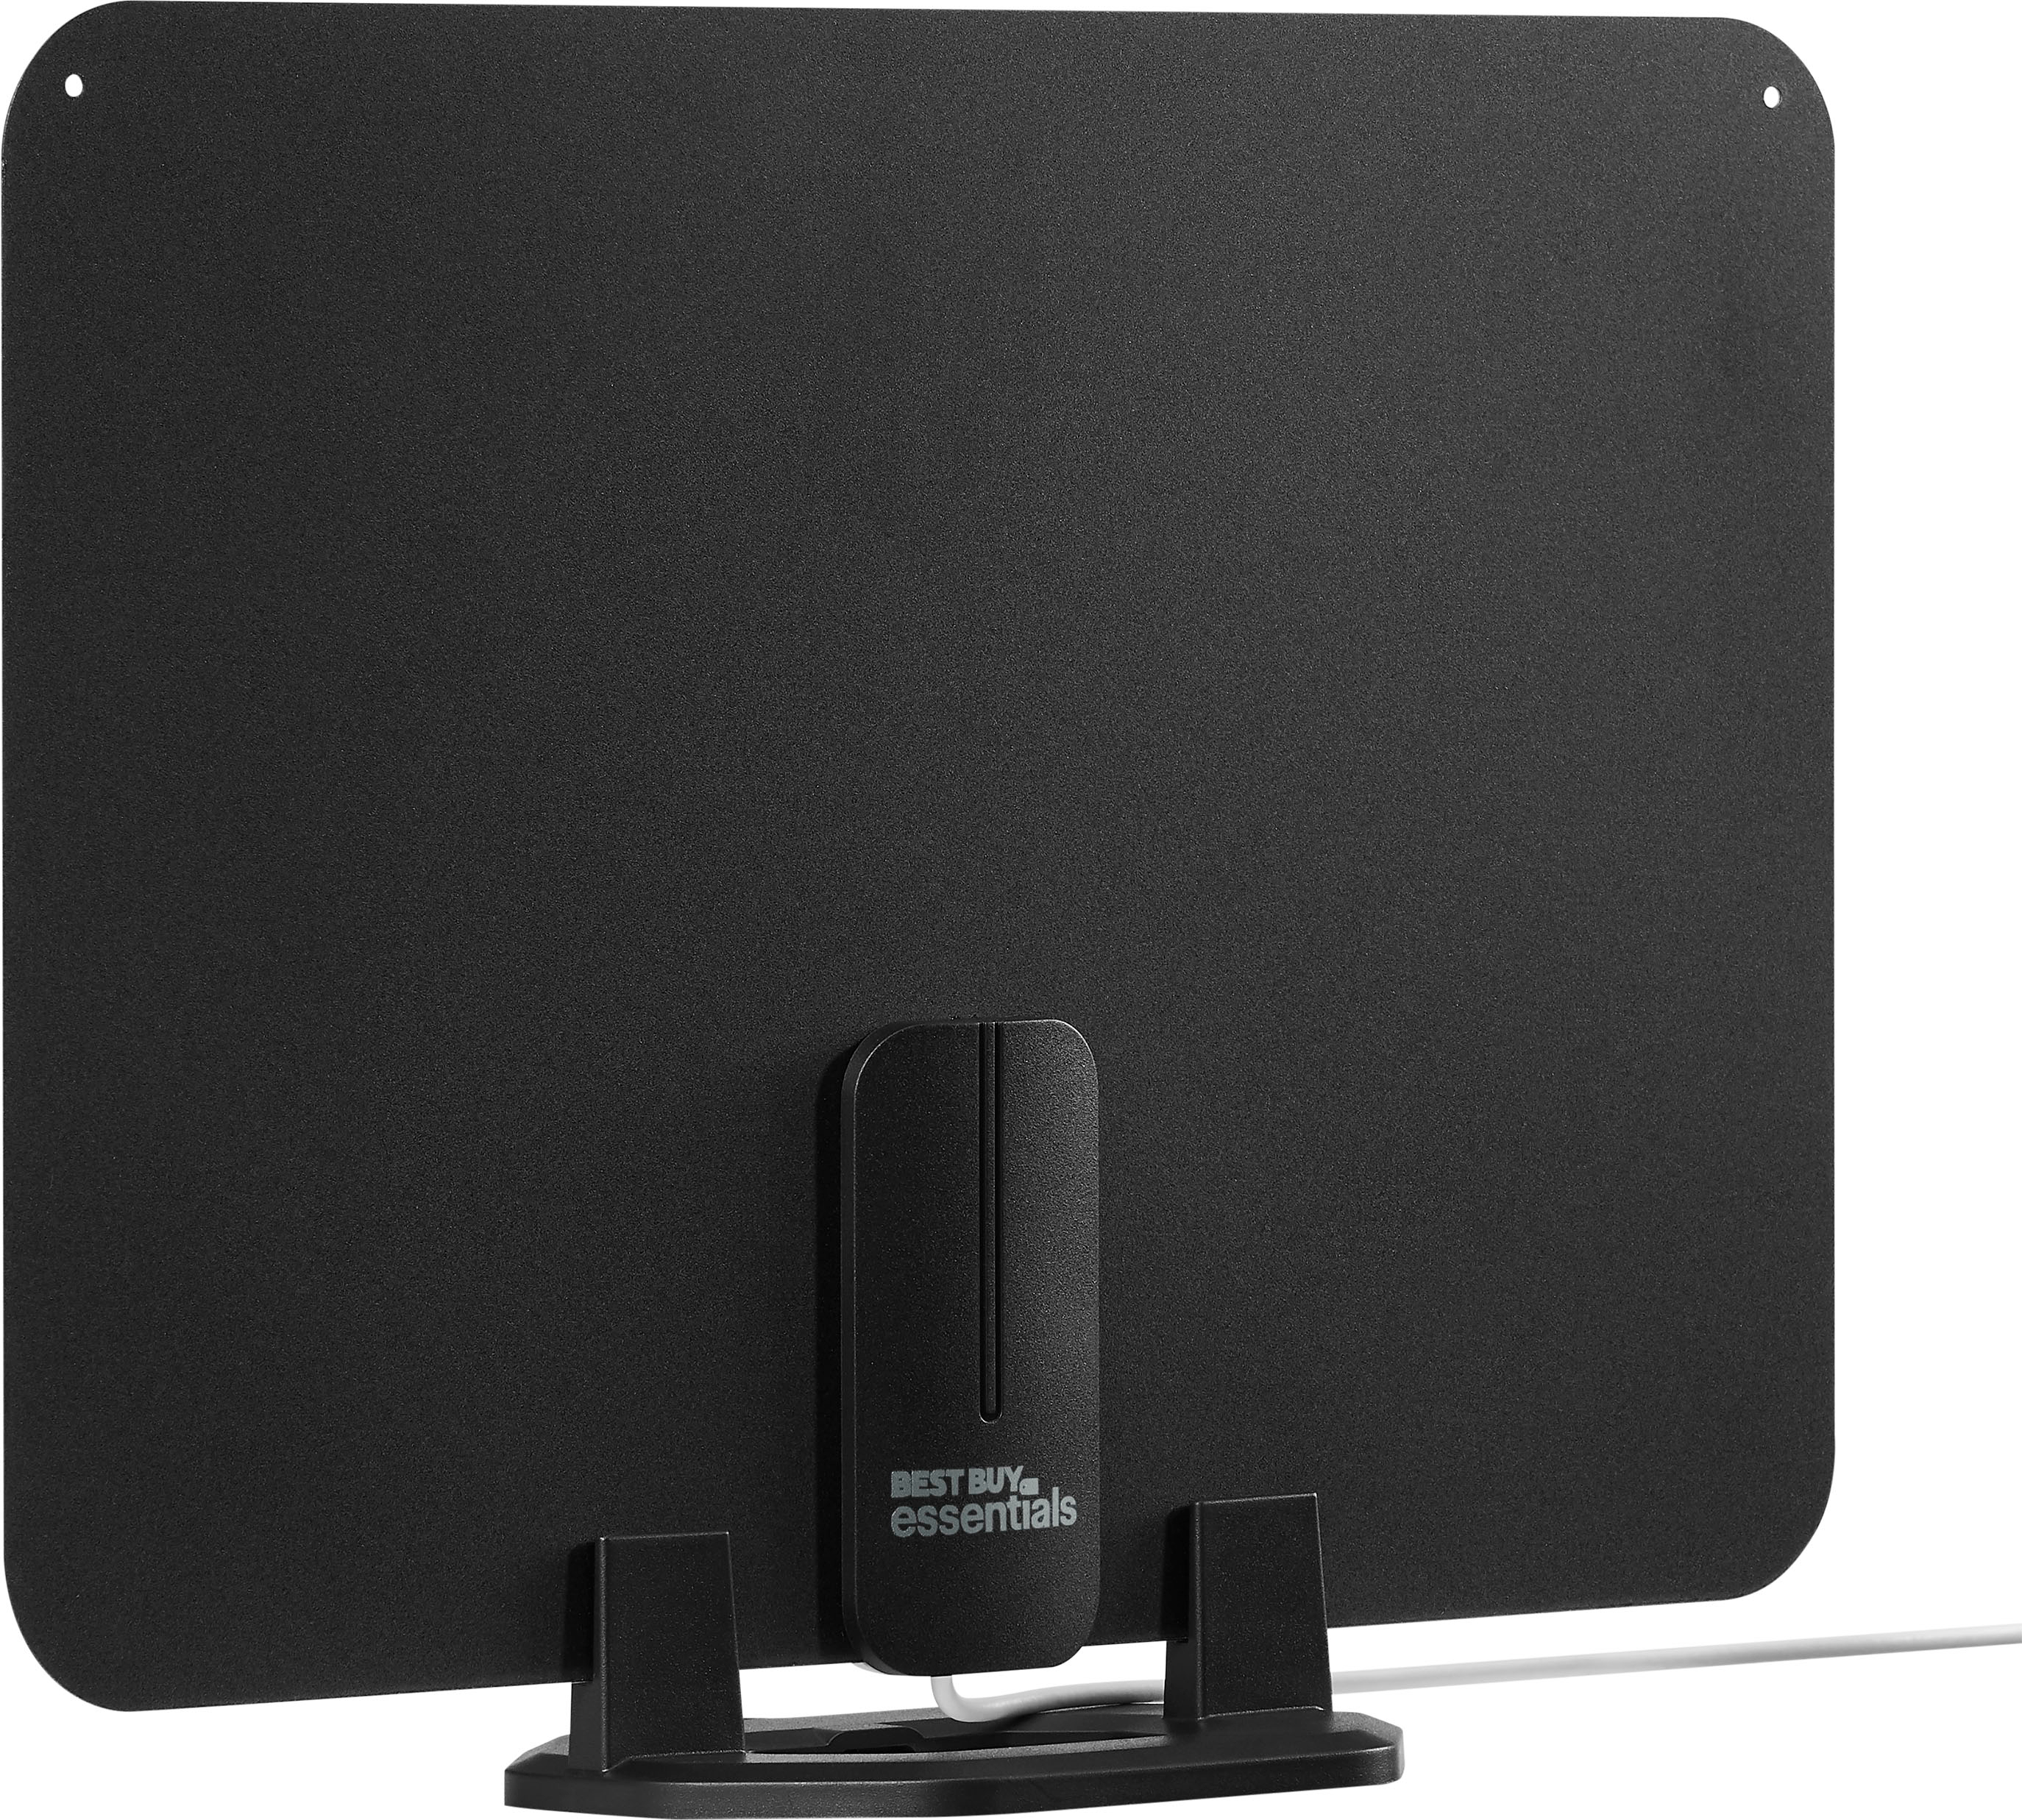 Angle View: Best Buy essentials™ - Amplified Ultra-Thin Indoor HDTV Antenna - 50 Mile Range - Black